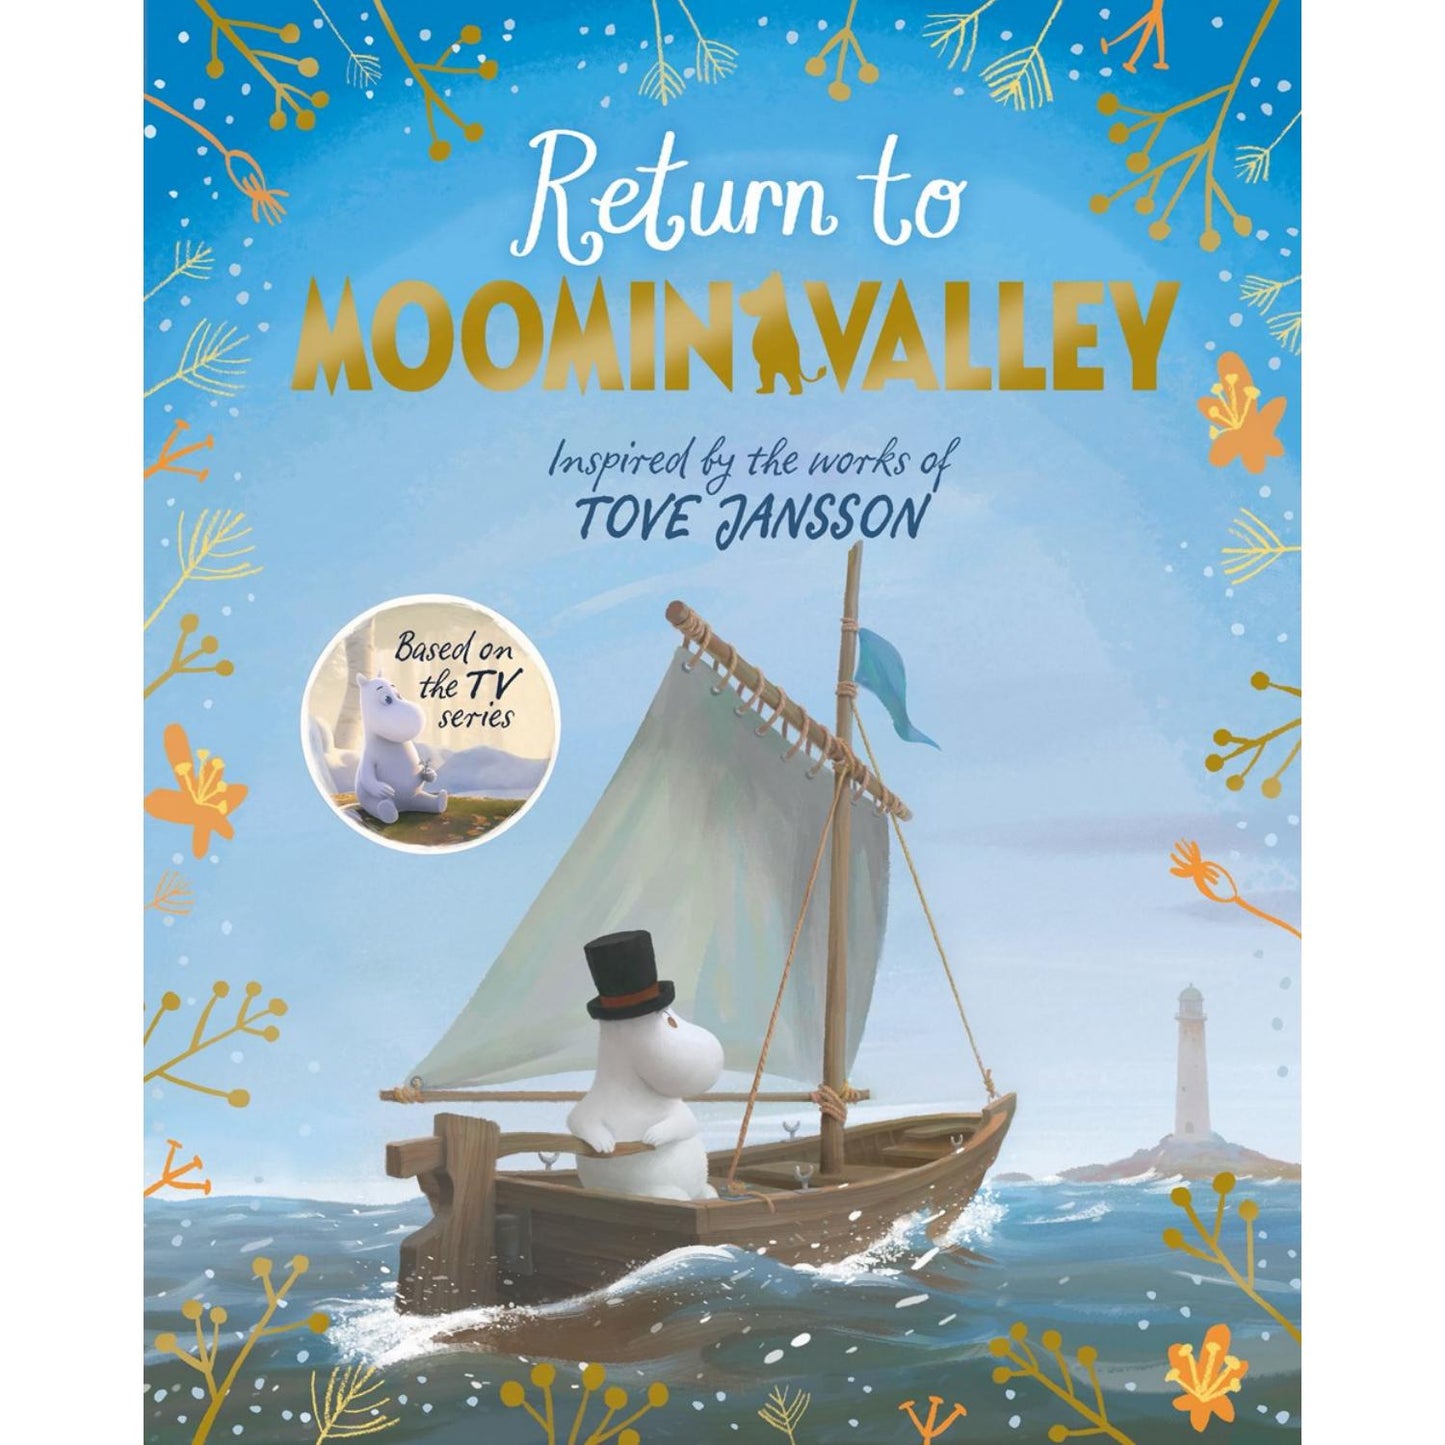 Return to Moominvalley | Hardcover | Children’s Picture Book